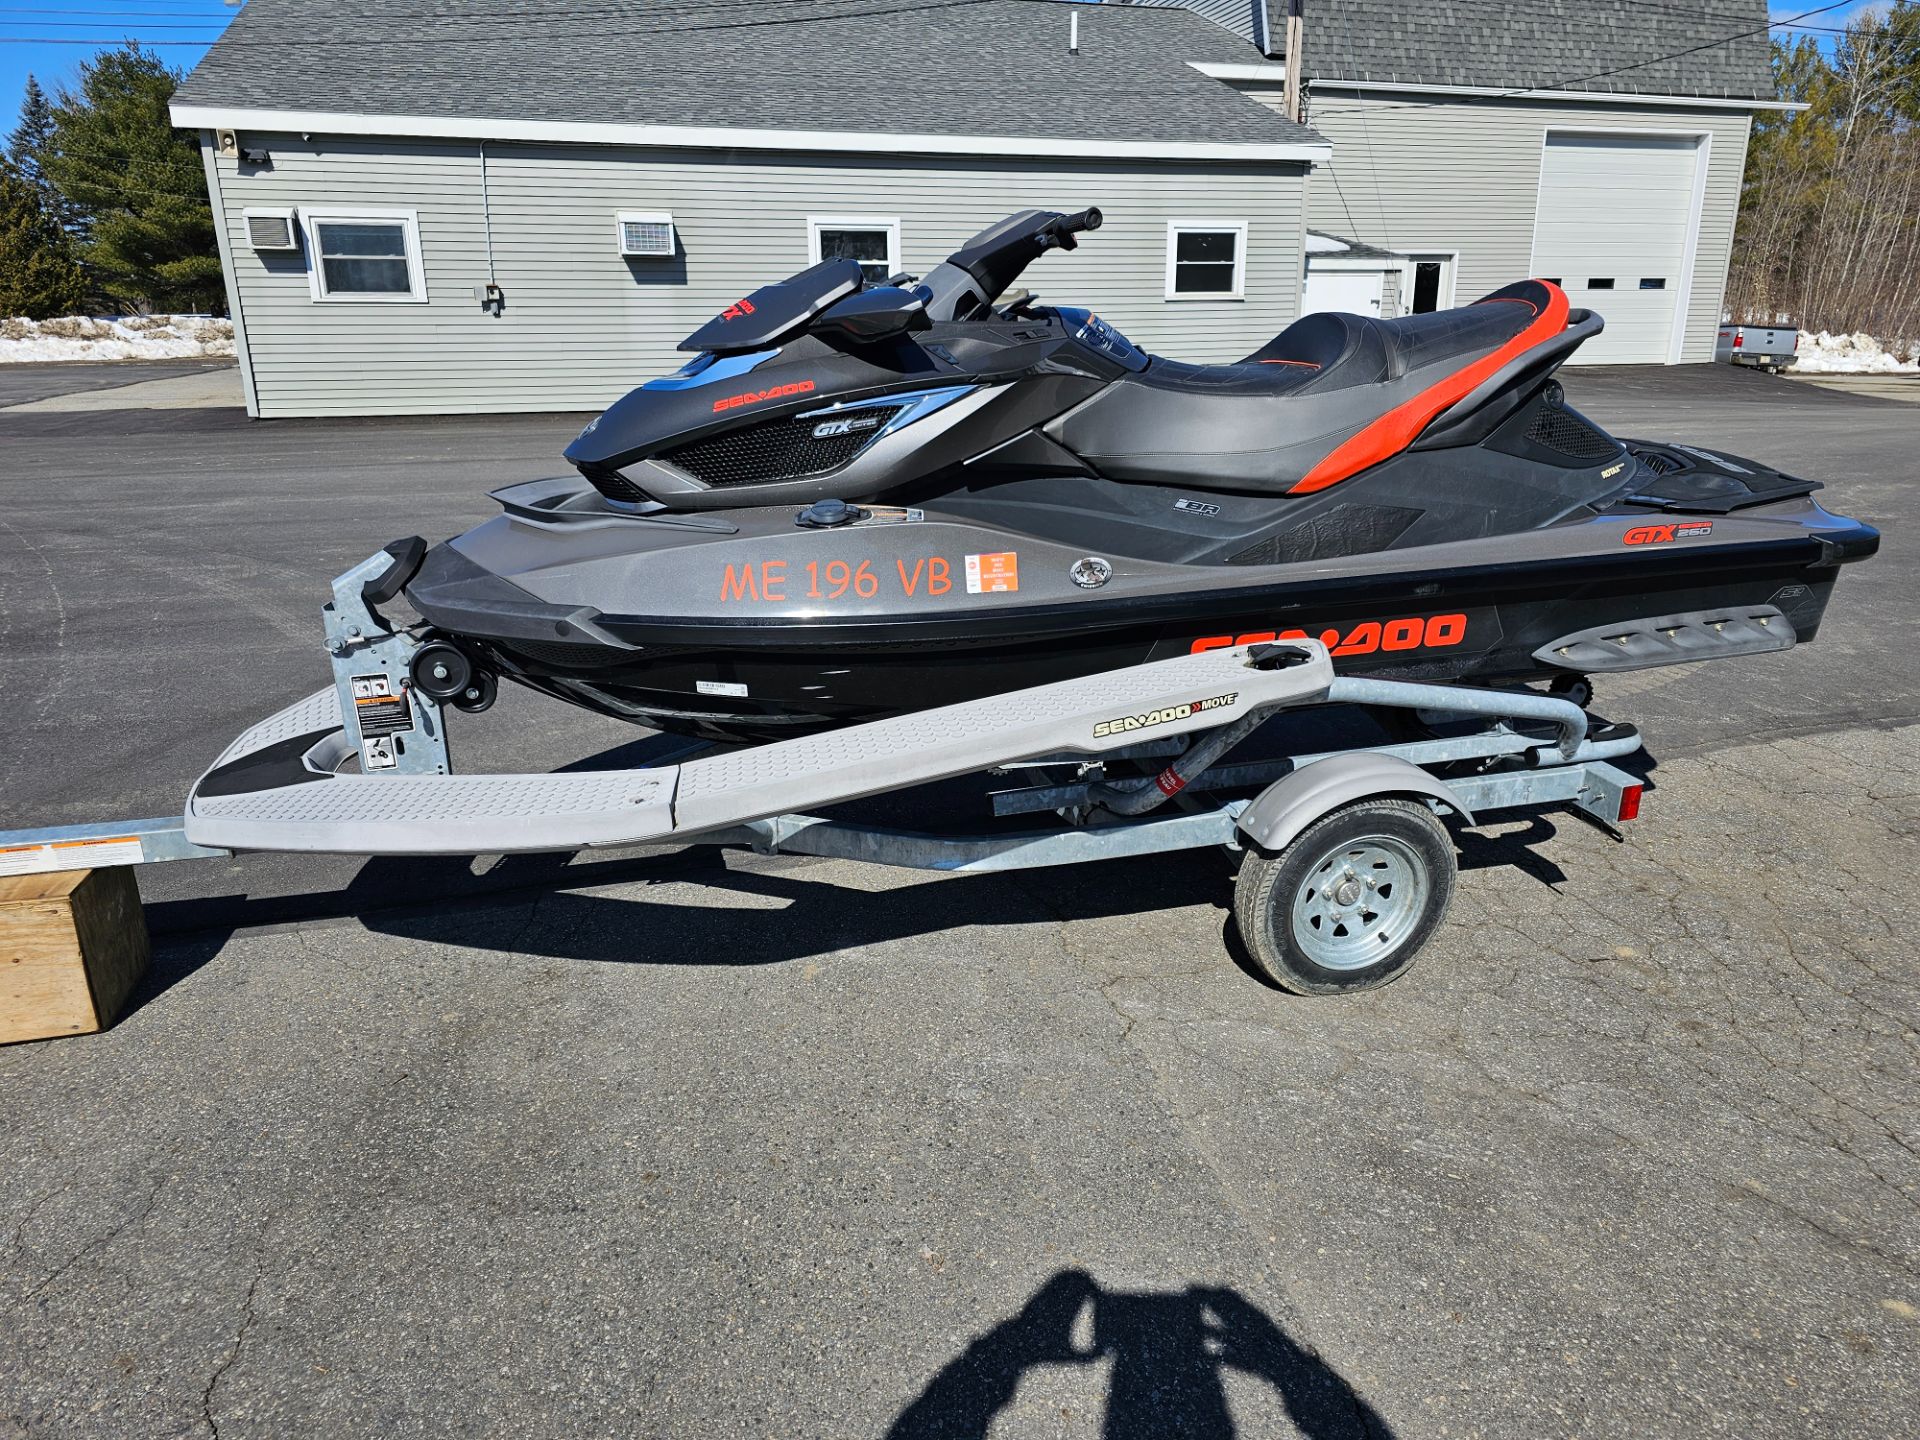 2014 Sea-Doo GTX Limited iS™ 260 in Augusta, Maine - Photo 1